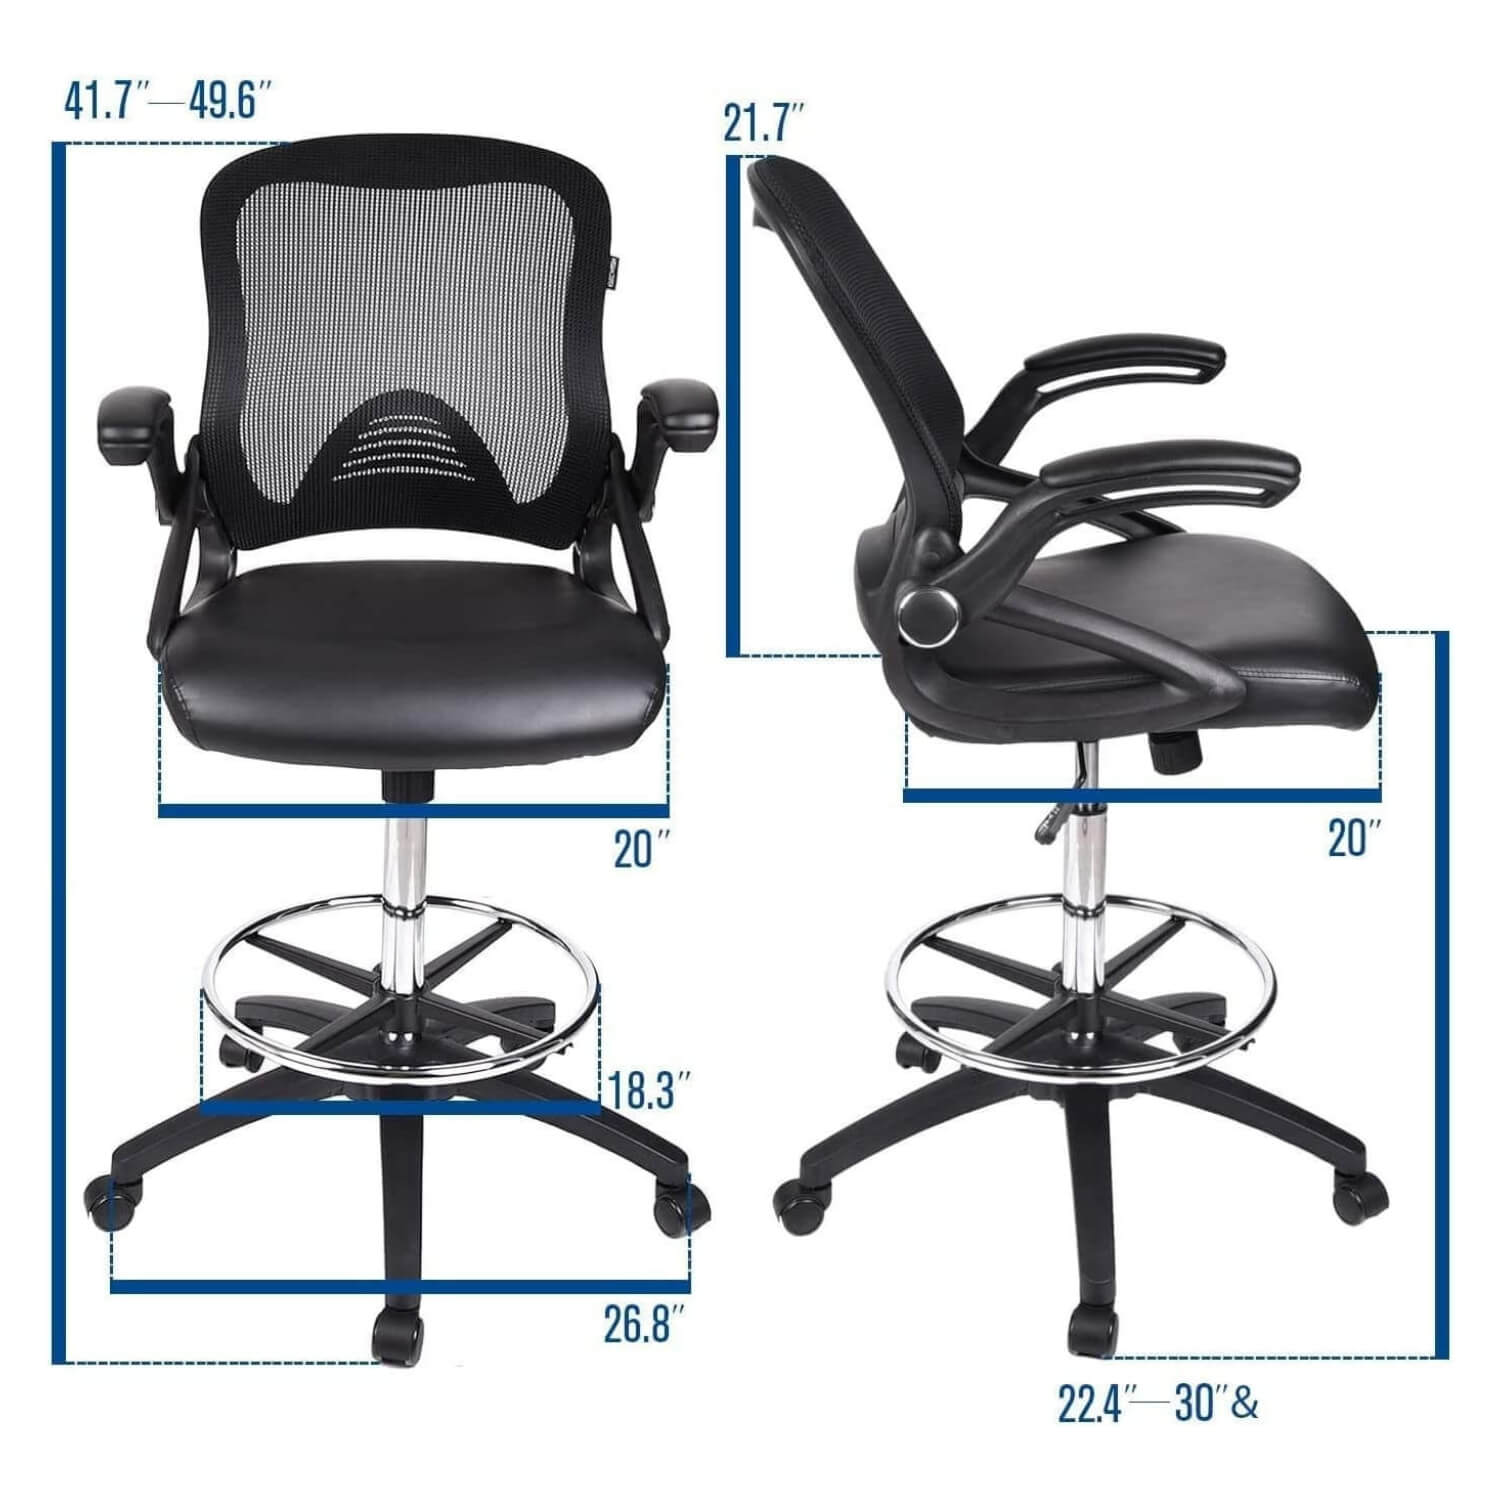 Elecwish Drafting Chairs Drafting Chair OC09 size